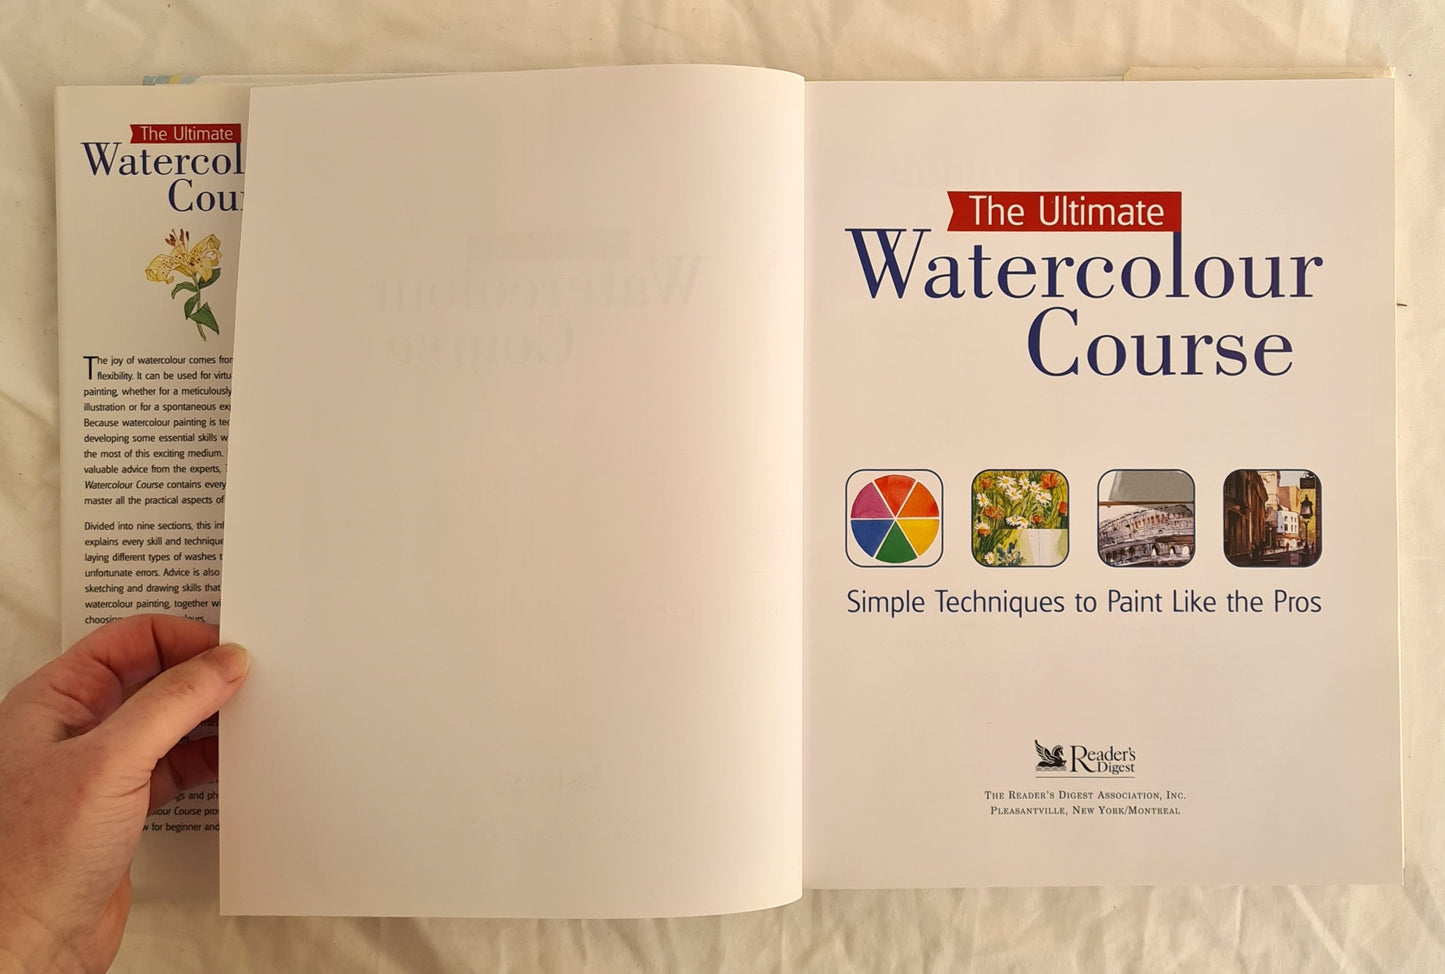 The Ultimate Watercolour Course Reader’s Digest